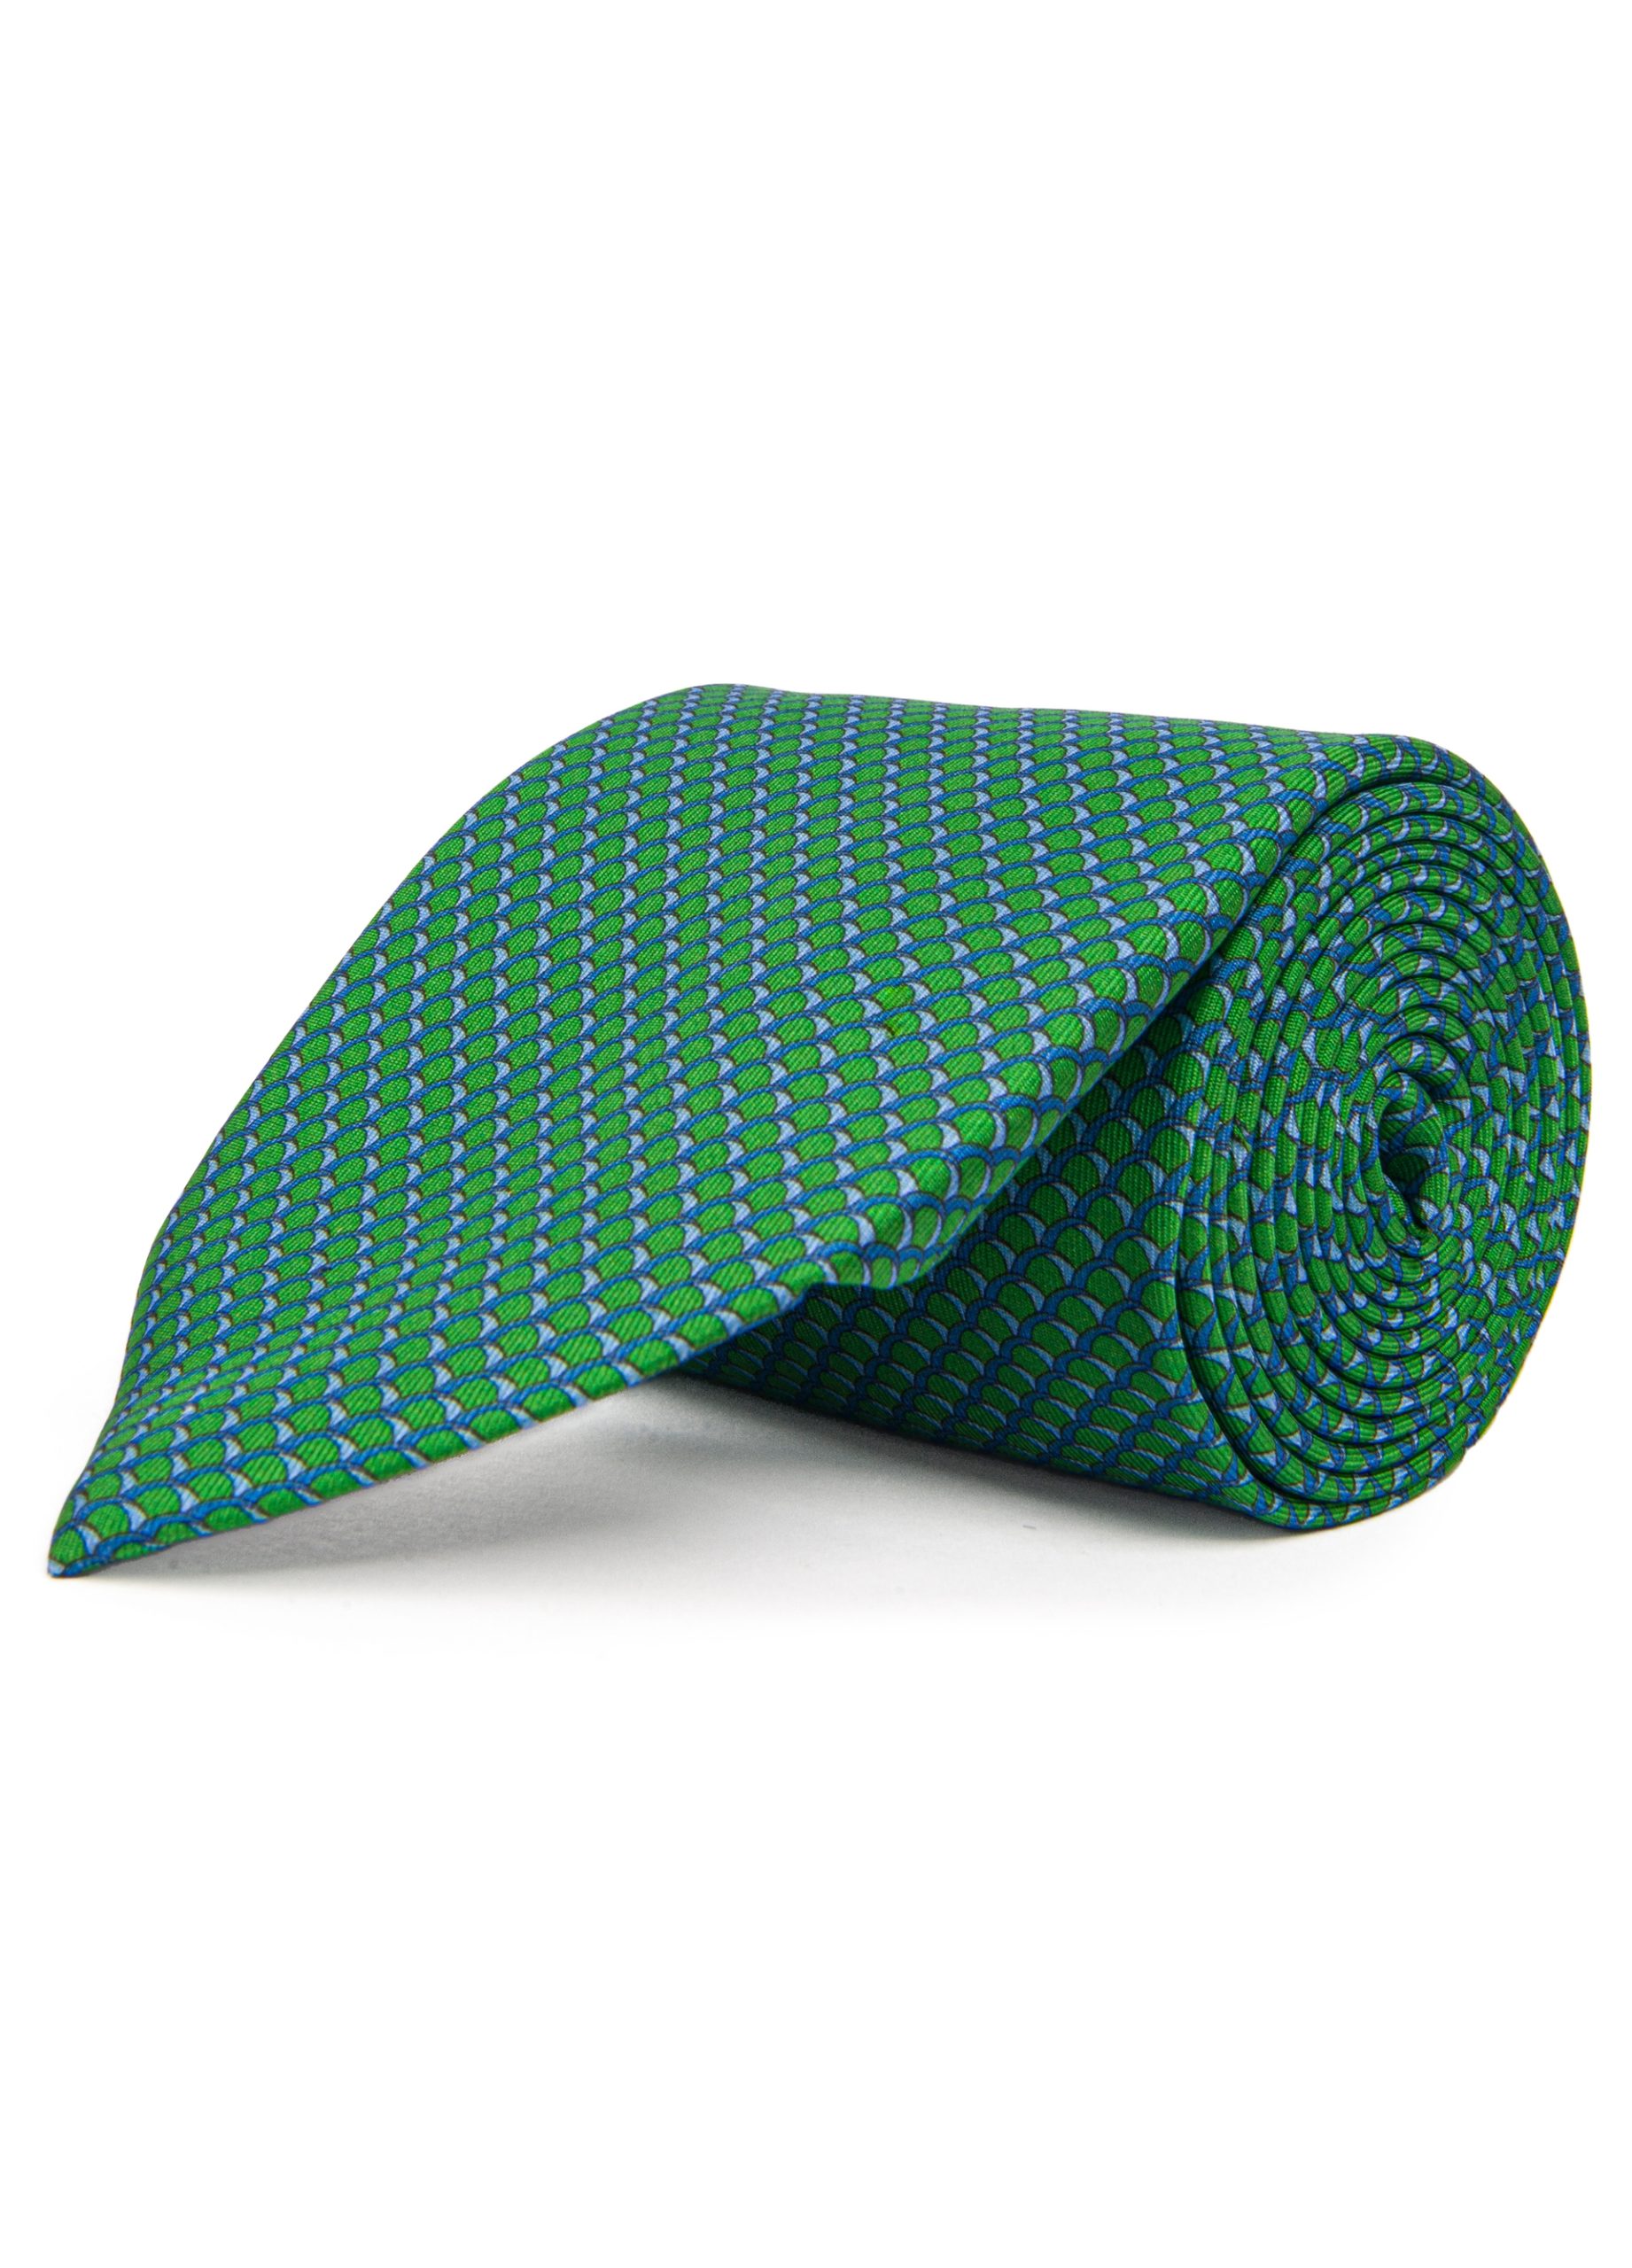 Roderick Charles patterned tie perfect for any occasion